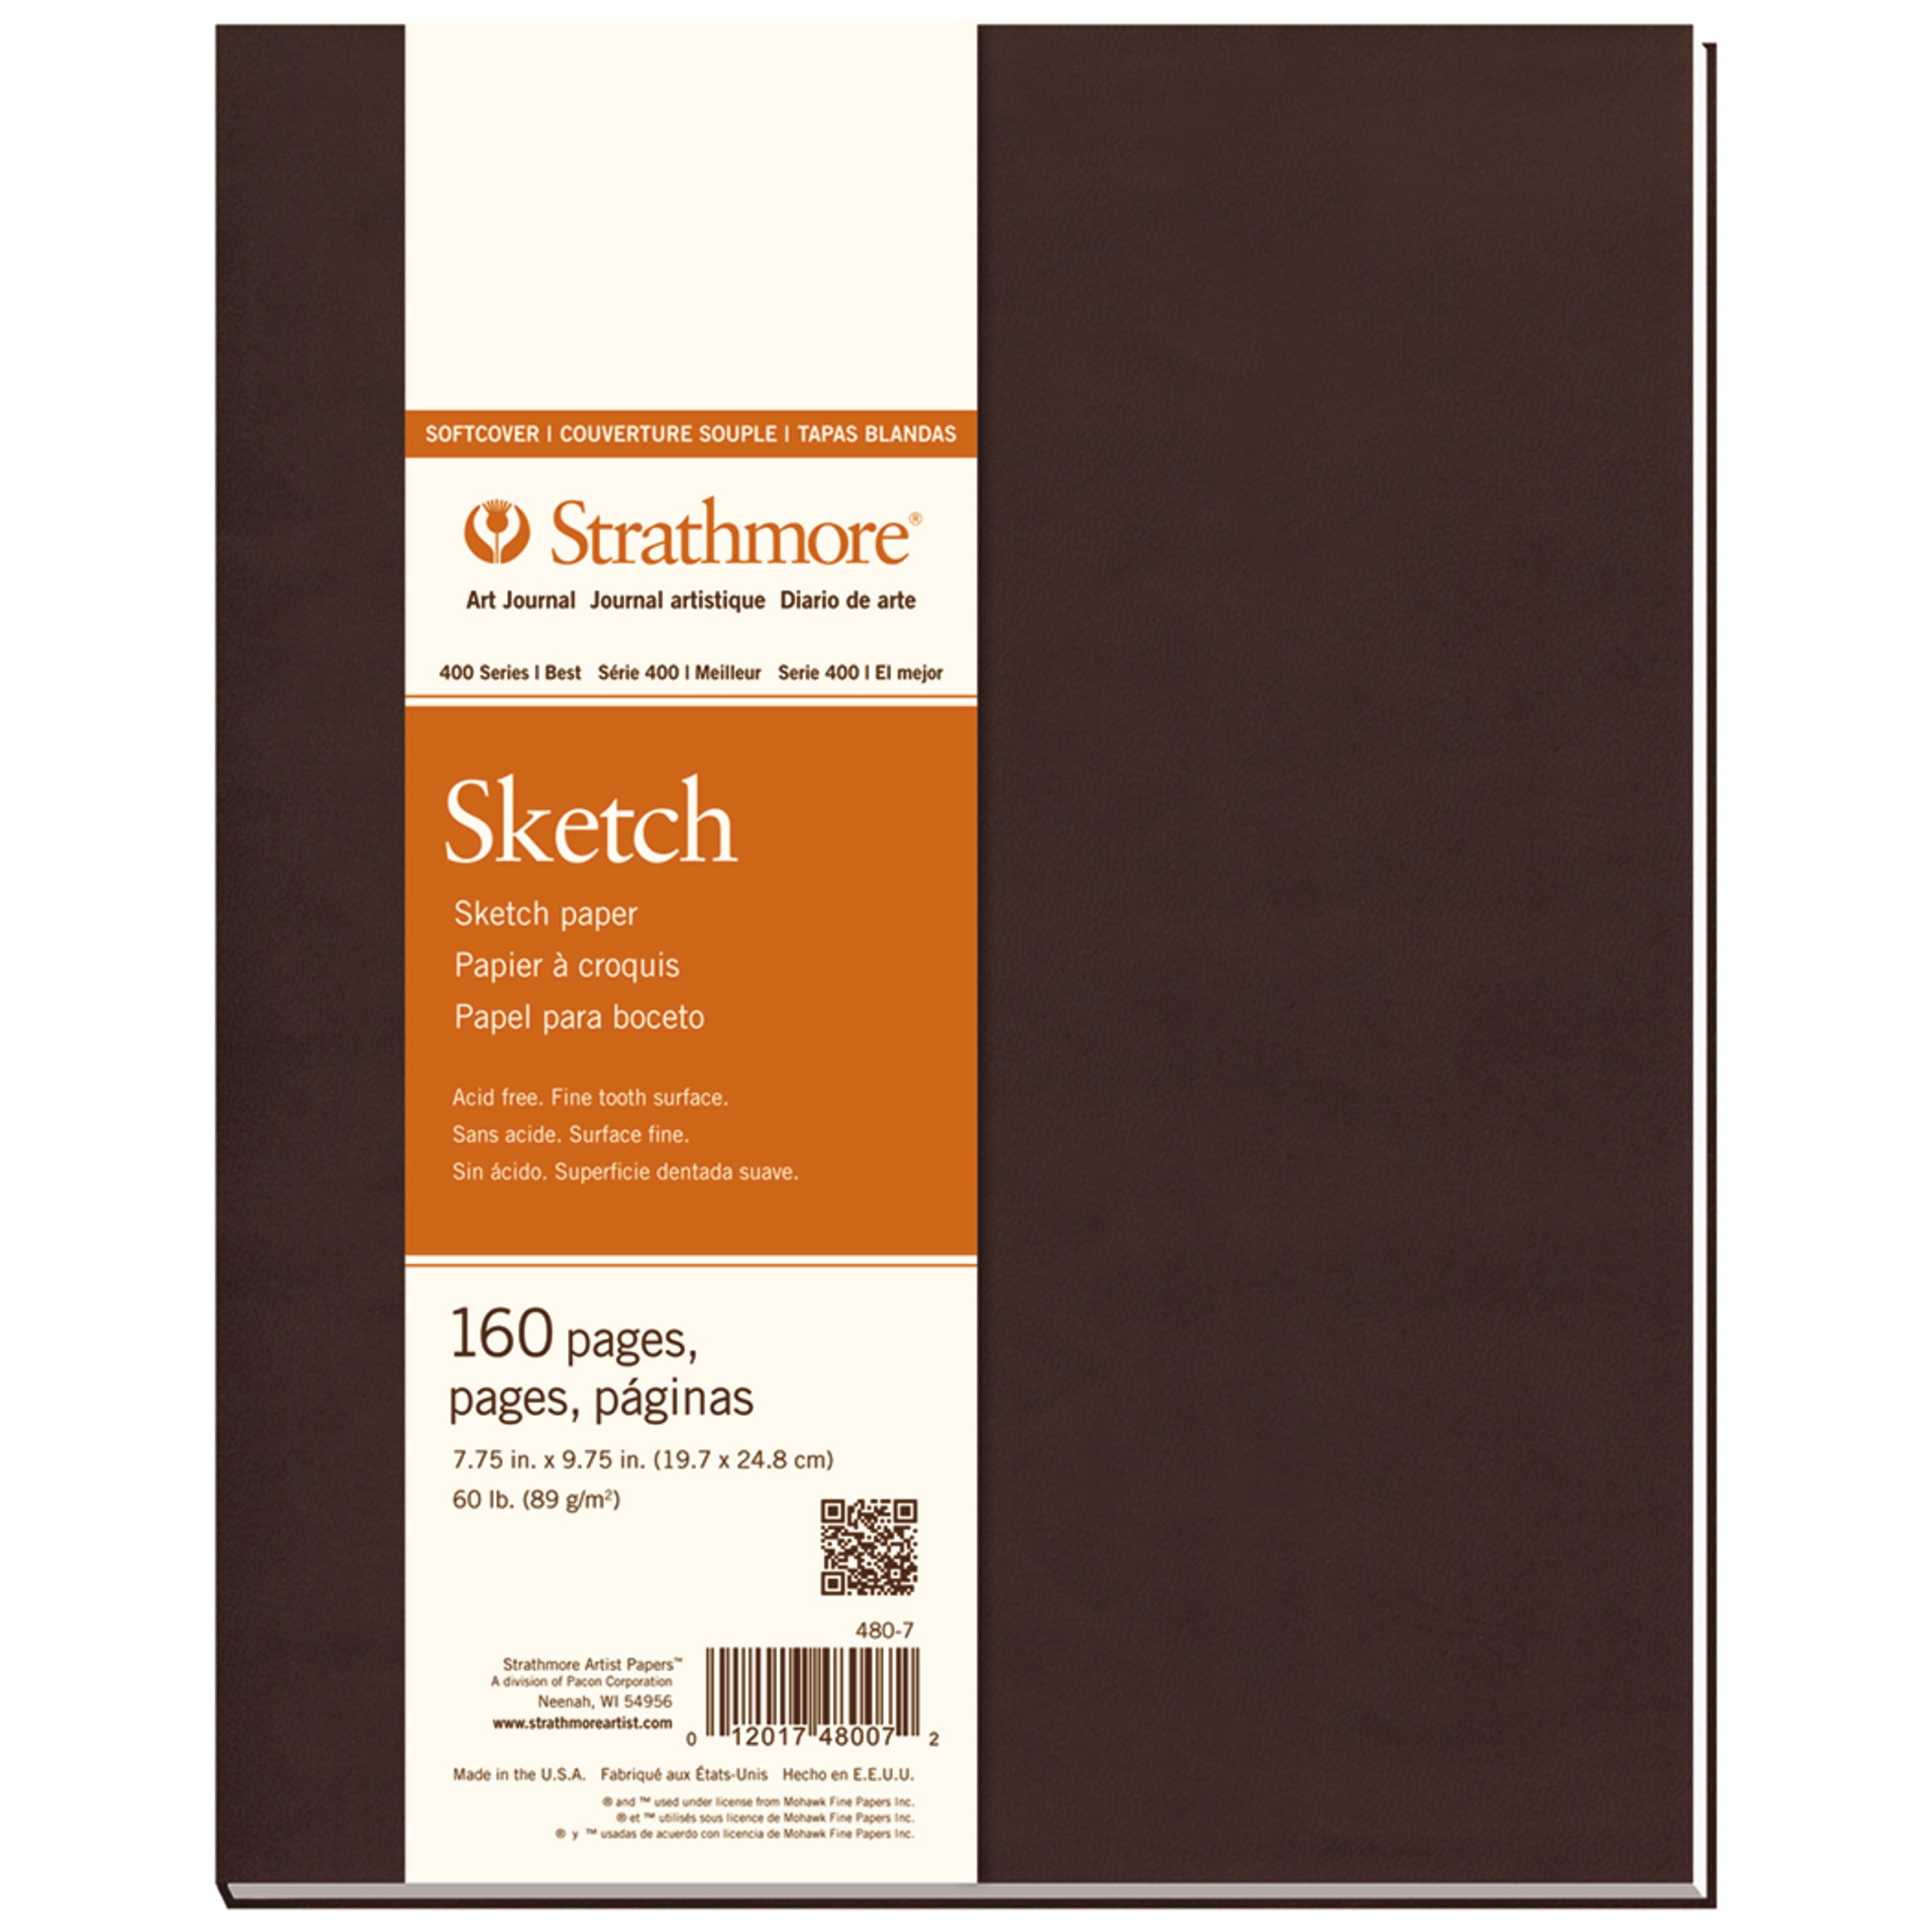 Strathmore Sketch Art Journal 7.75 x 9.75 / Softcover